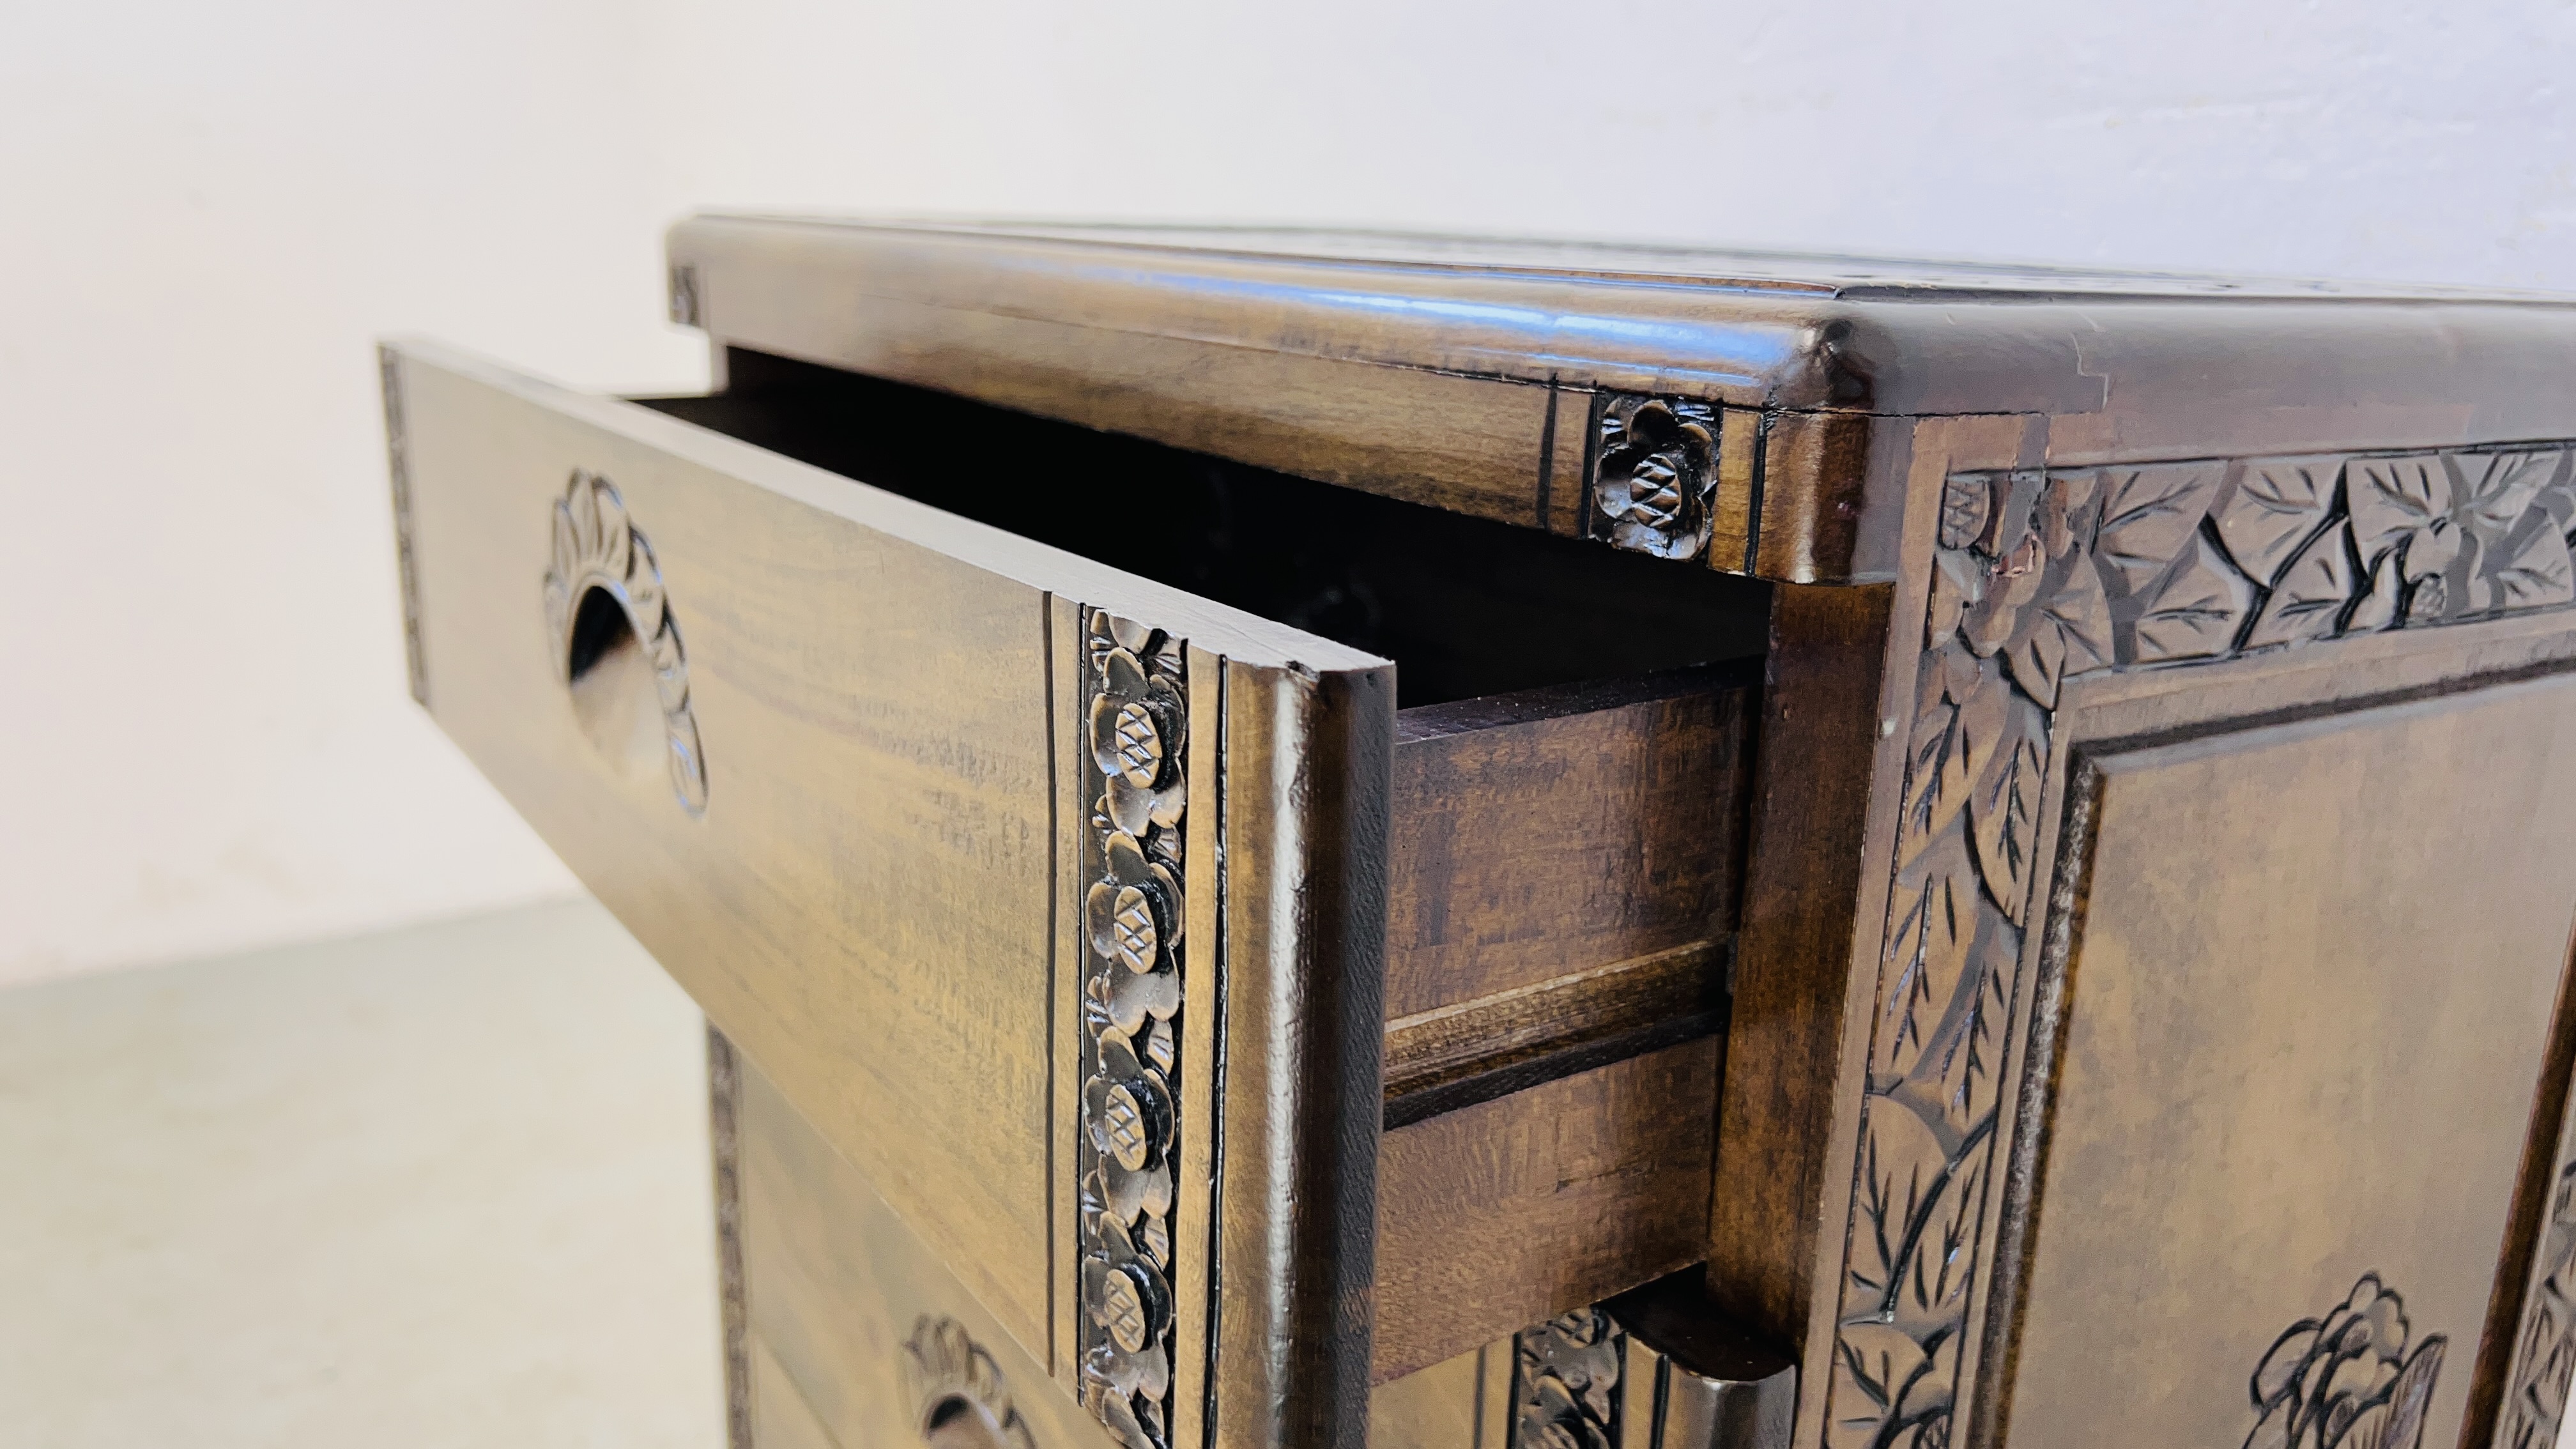 A 5 DRAWER HARDWOOD CHEST WITH A PAIR OF STALKS CARVED TO TOP AND FLORAL DECORATION CARVING - W - Image 9 of 11